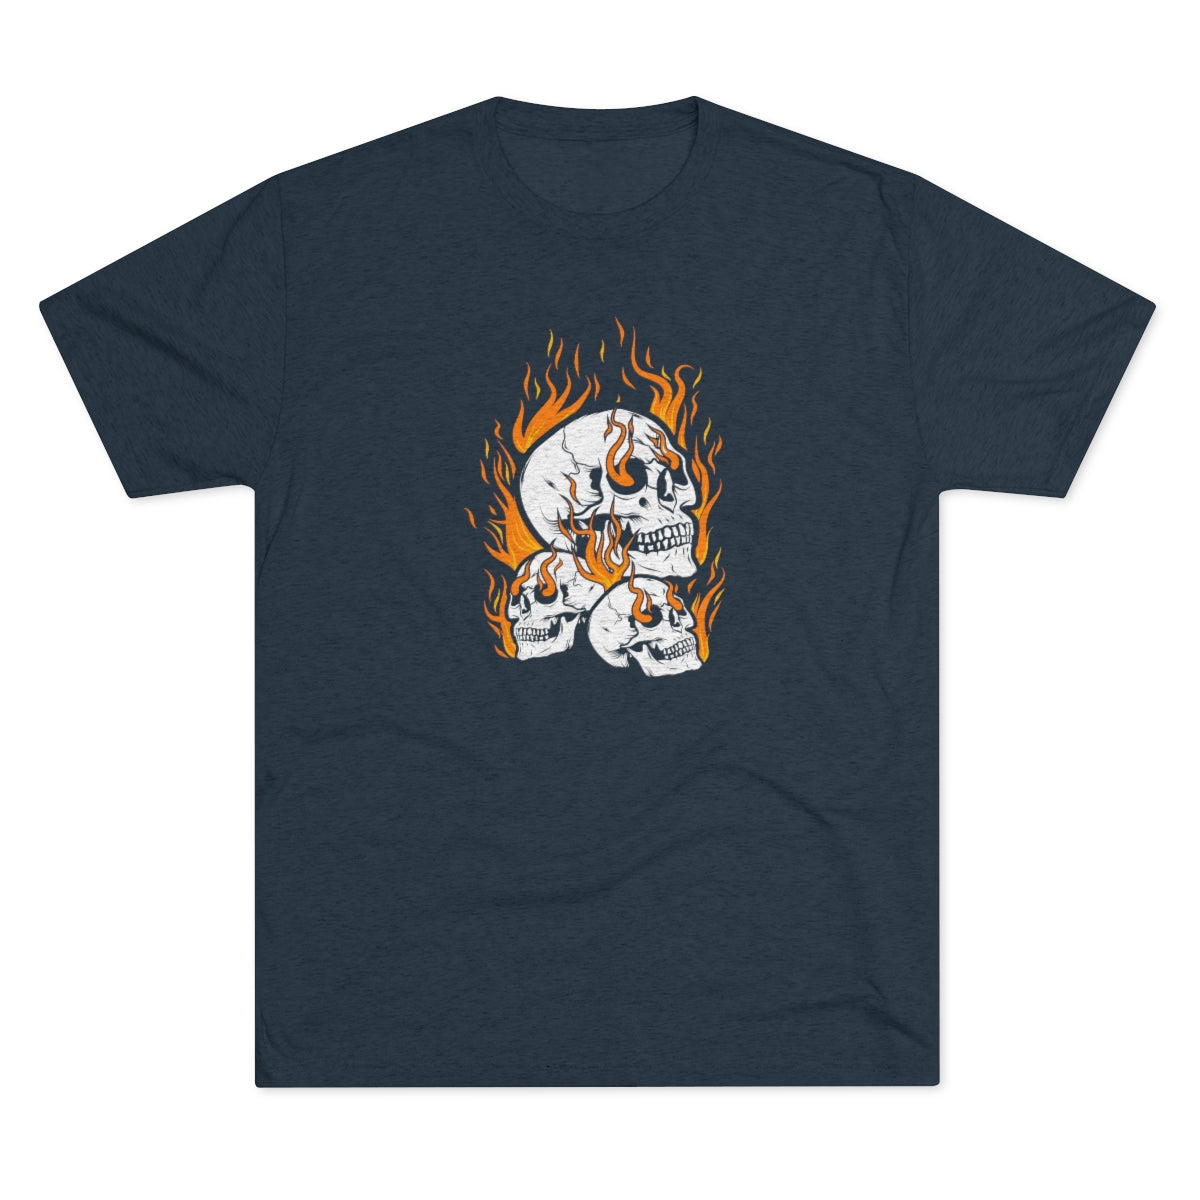 Special Collection – Phobia: Pyrophobia – Unisex Tri-Blend Crew Tee